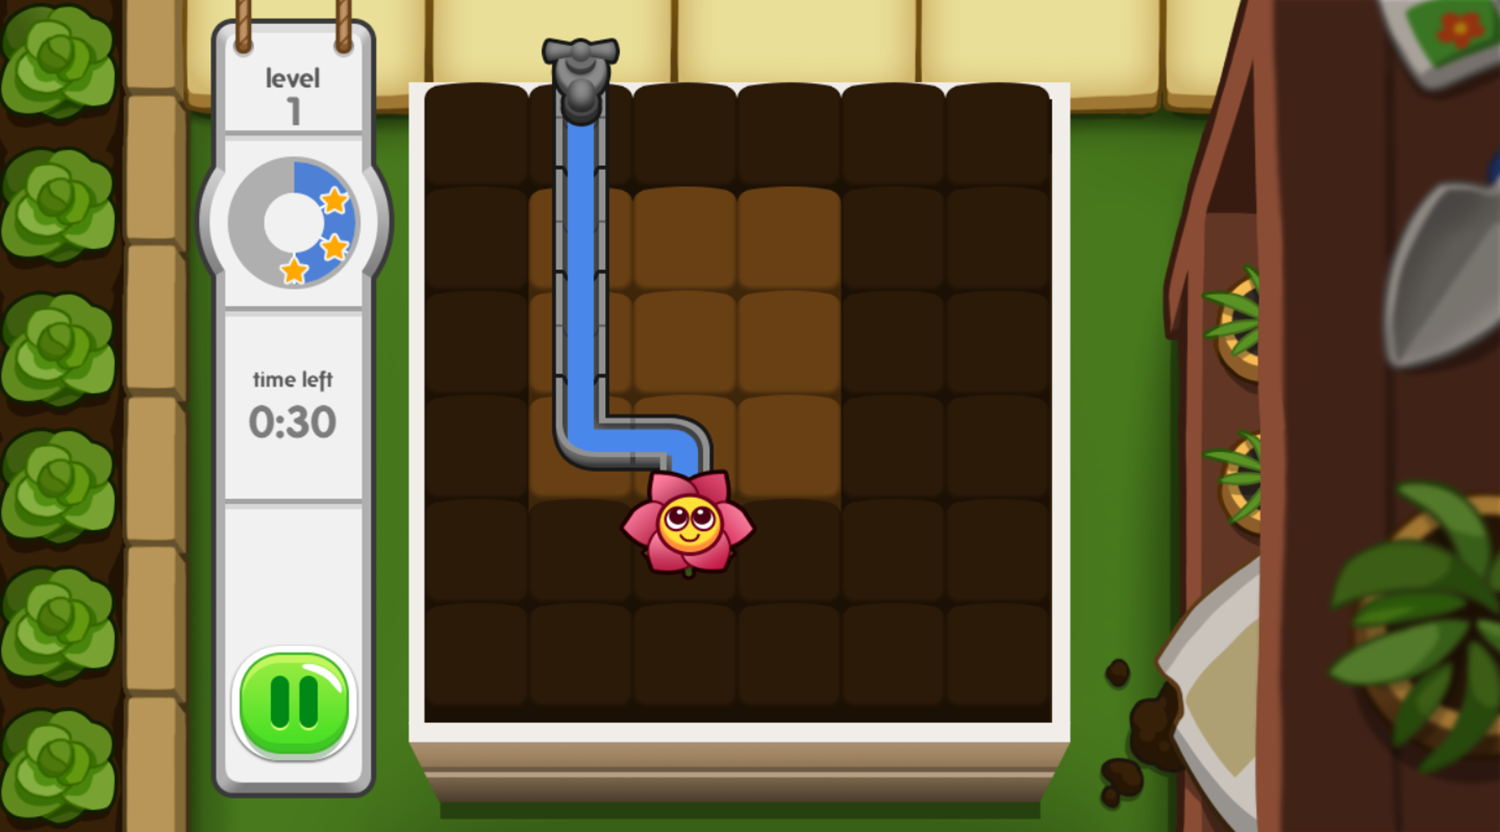 Daisy's Plumber Puzzle Game Play Screenshot.